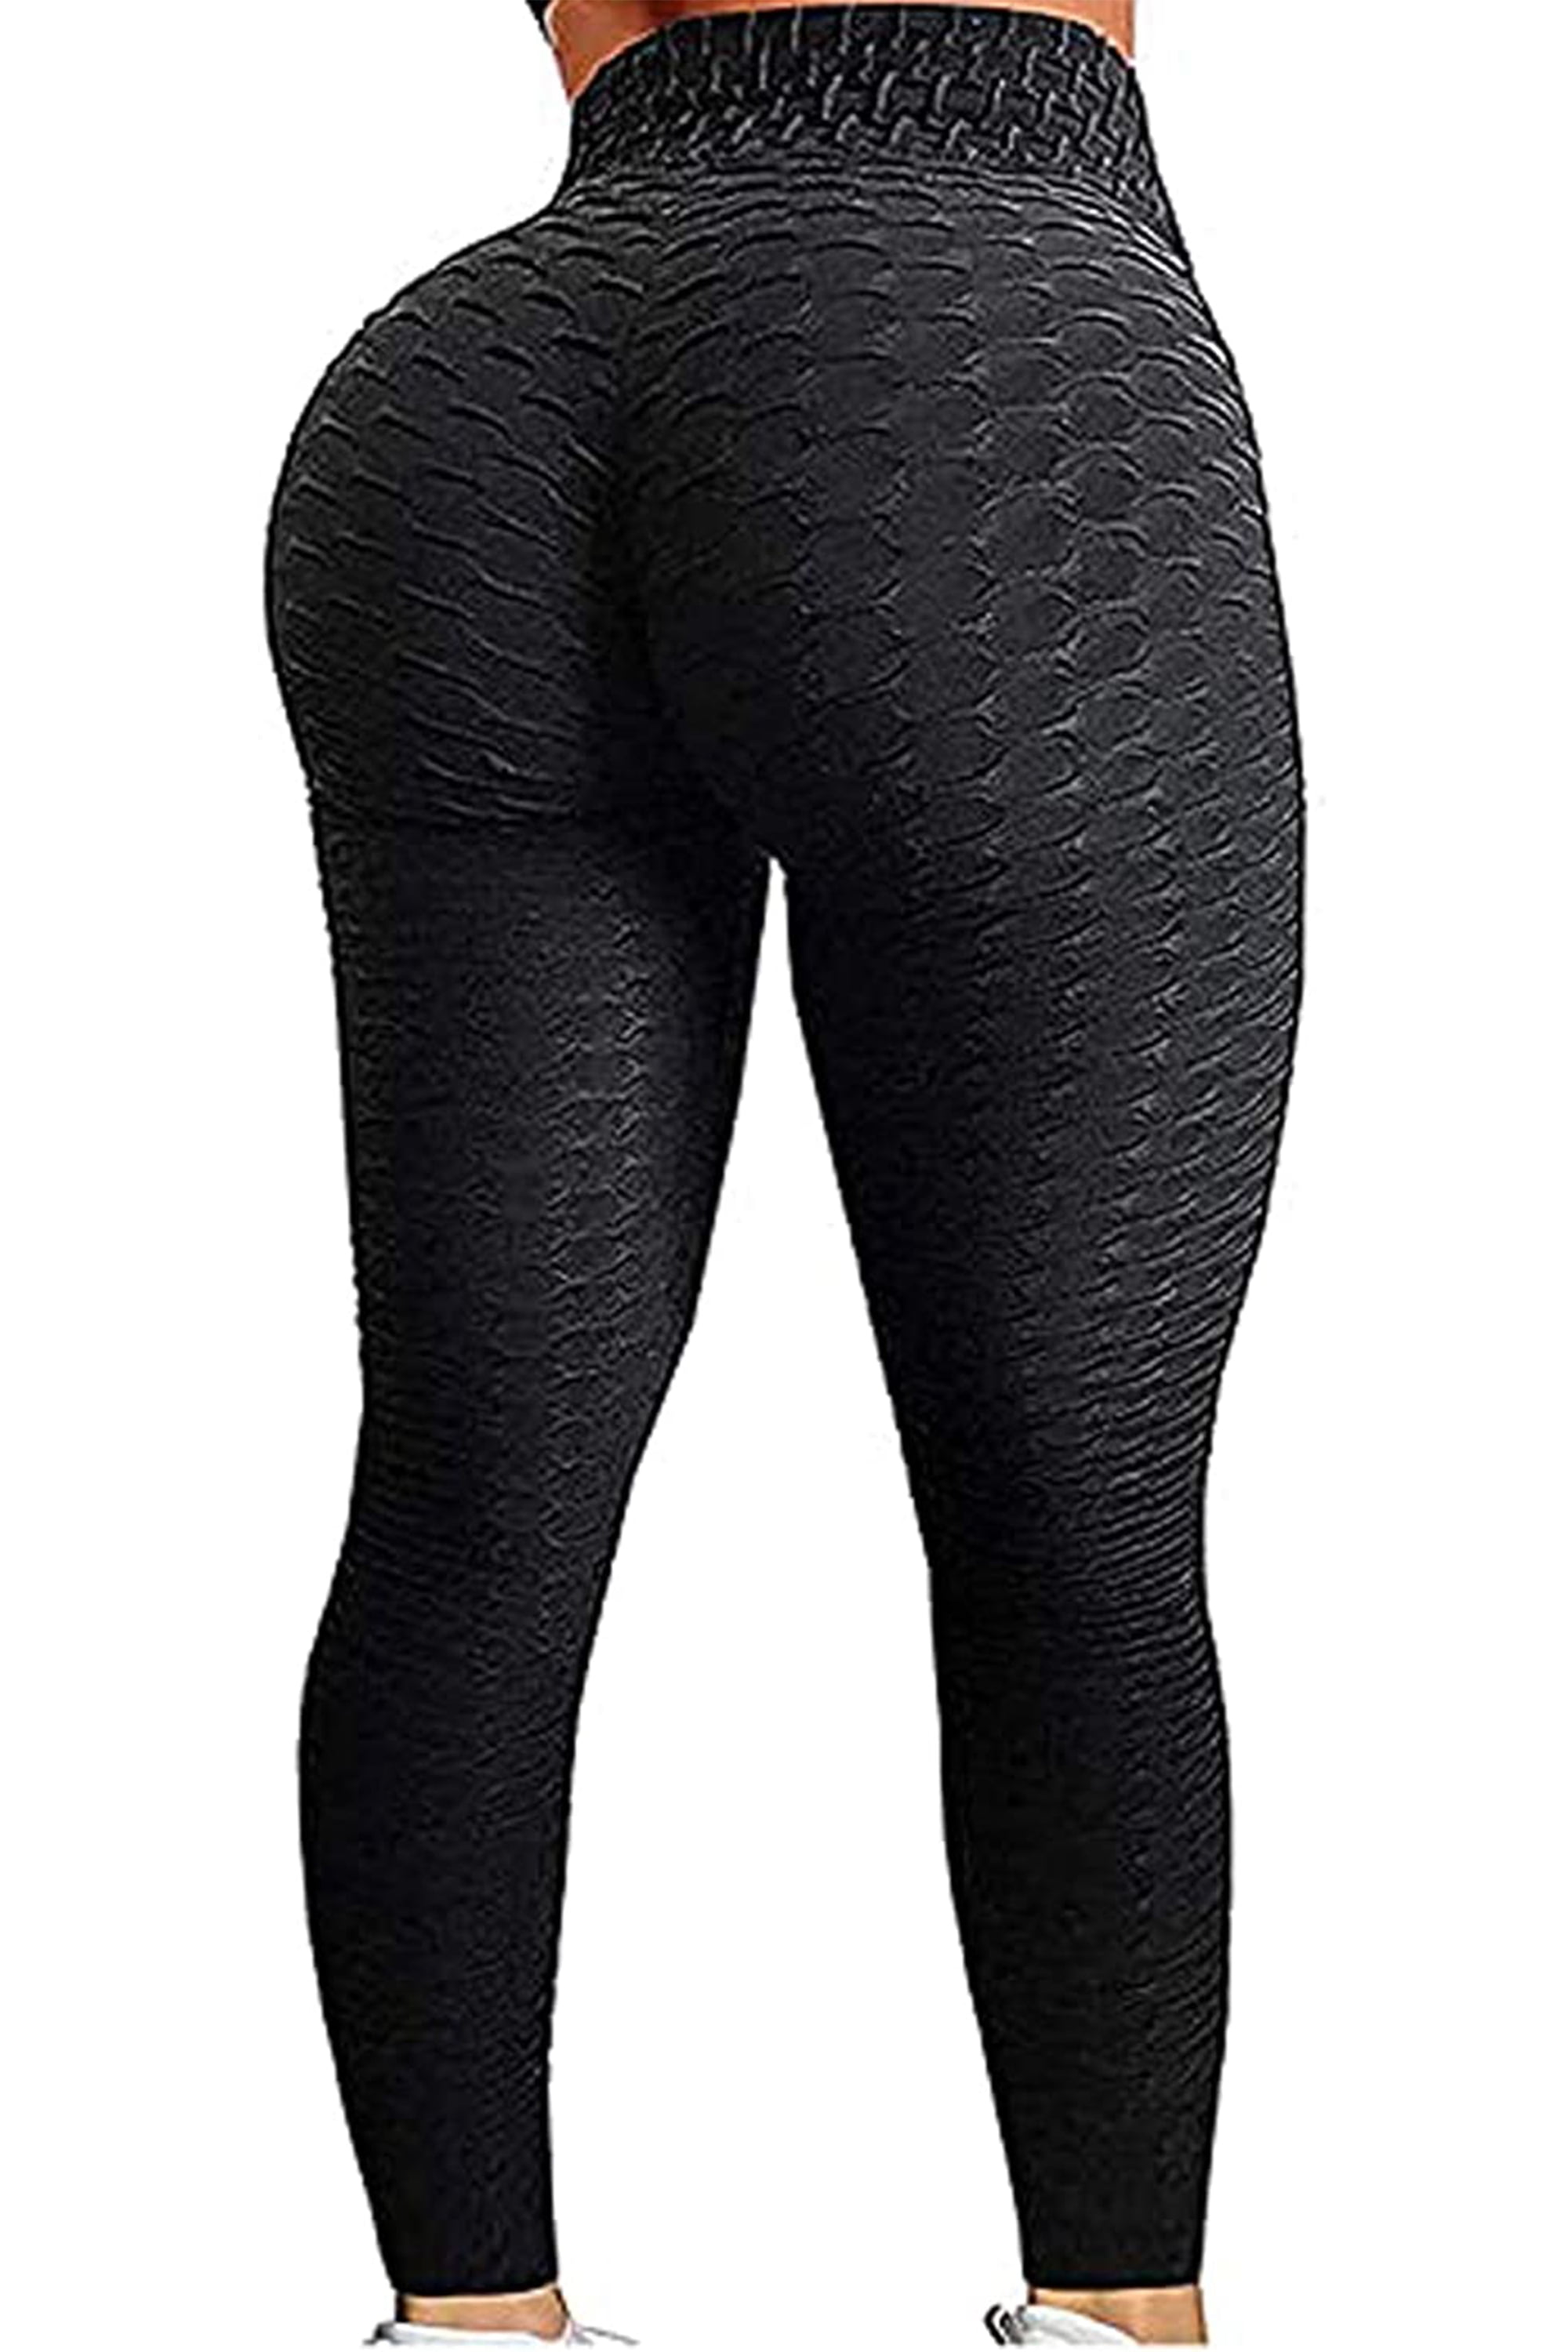 FITTOO Women Booty Yoga Pants High Waisted Ruched Butt Lift Textured ...